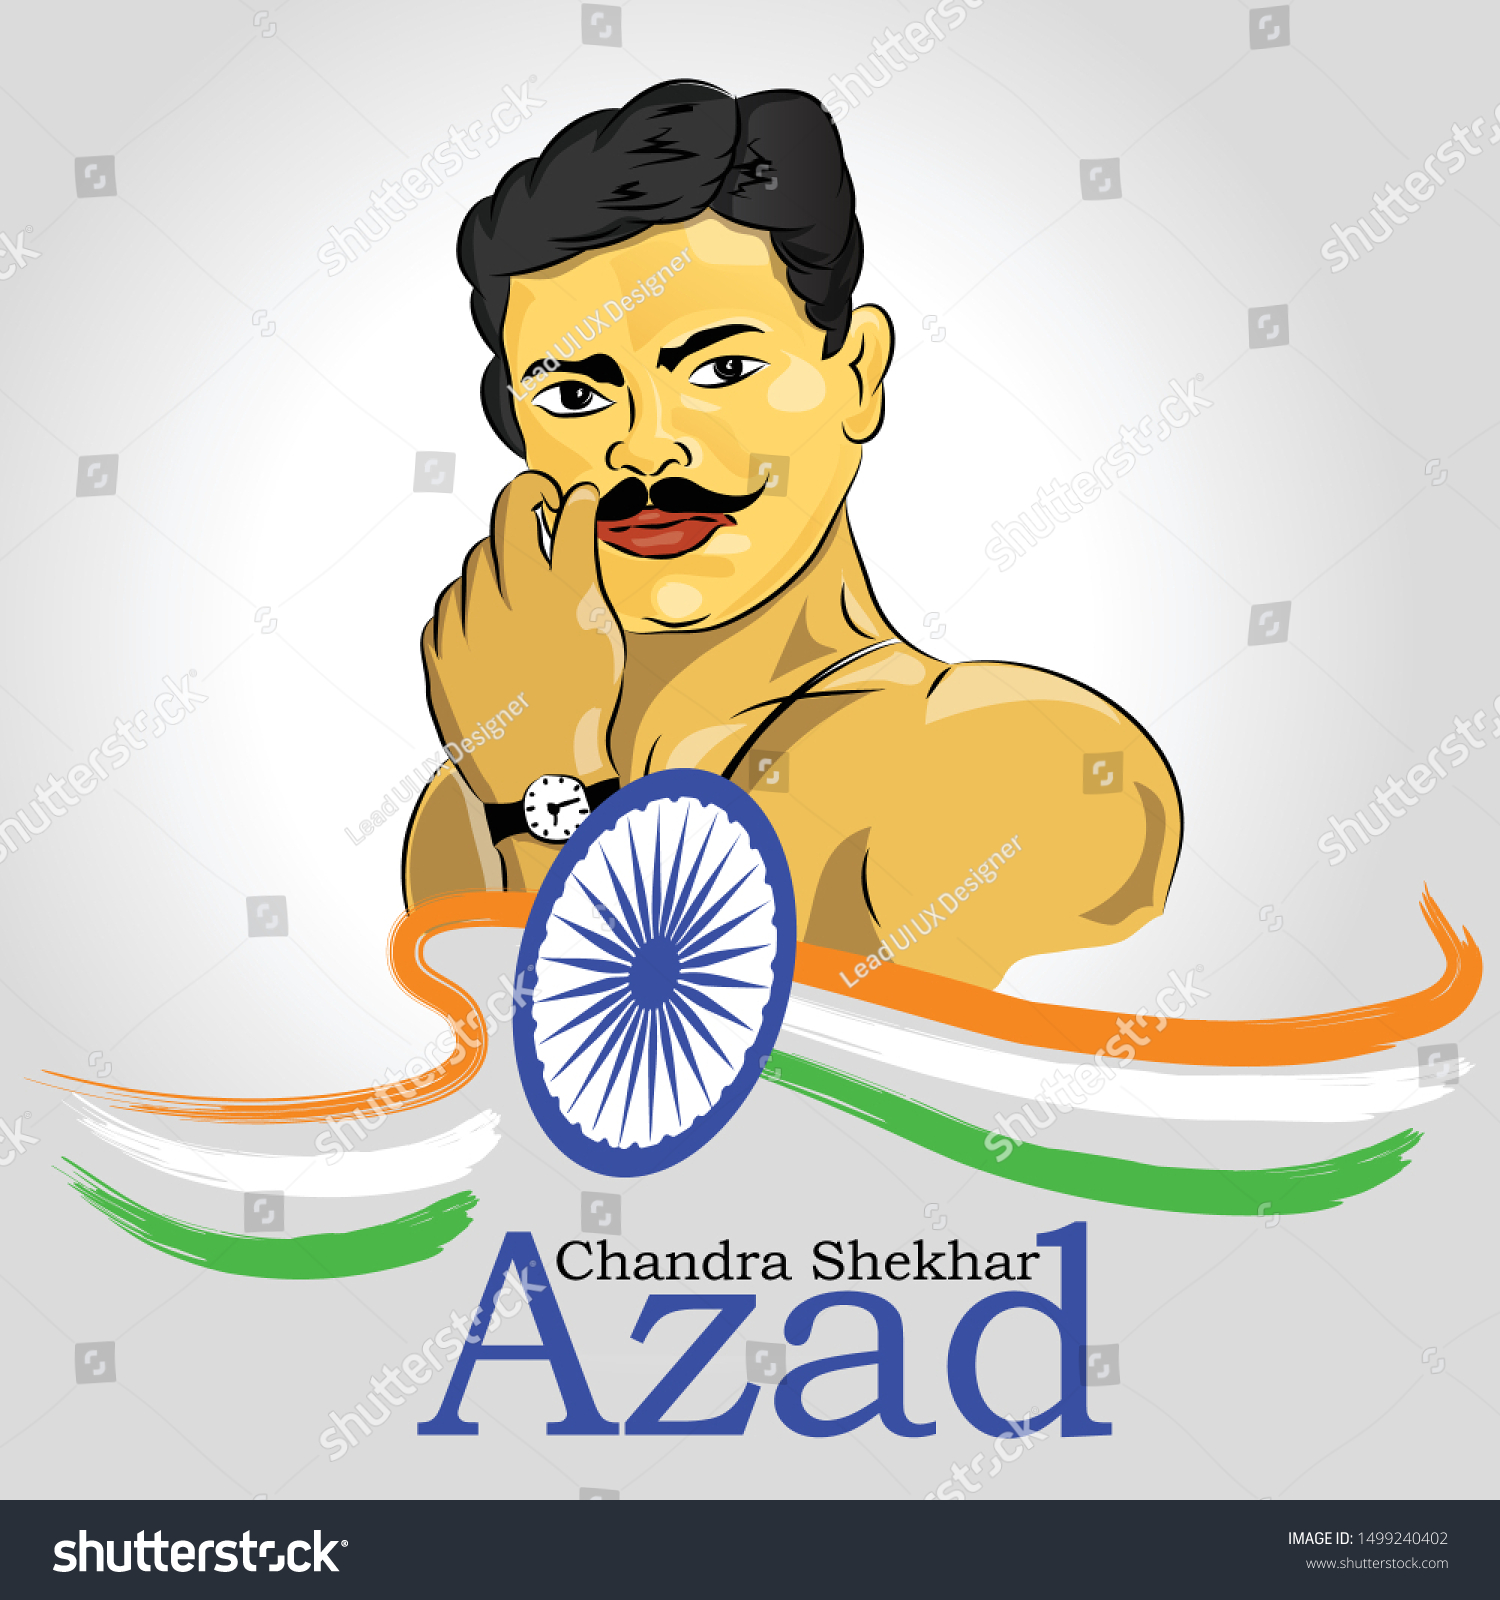 Azad’s Contribution to India’s Independence